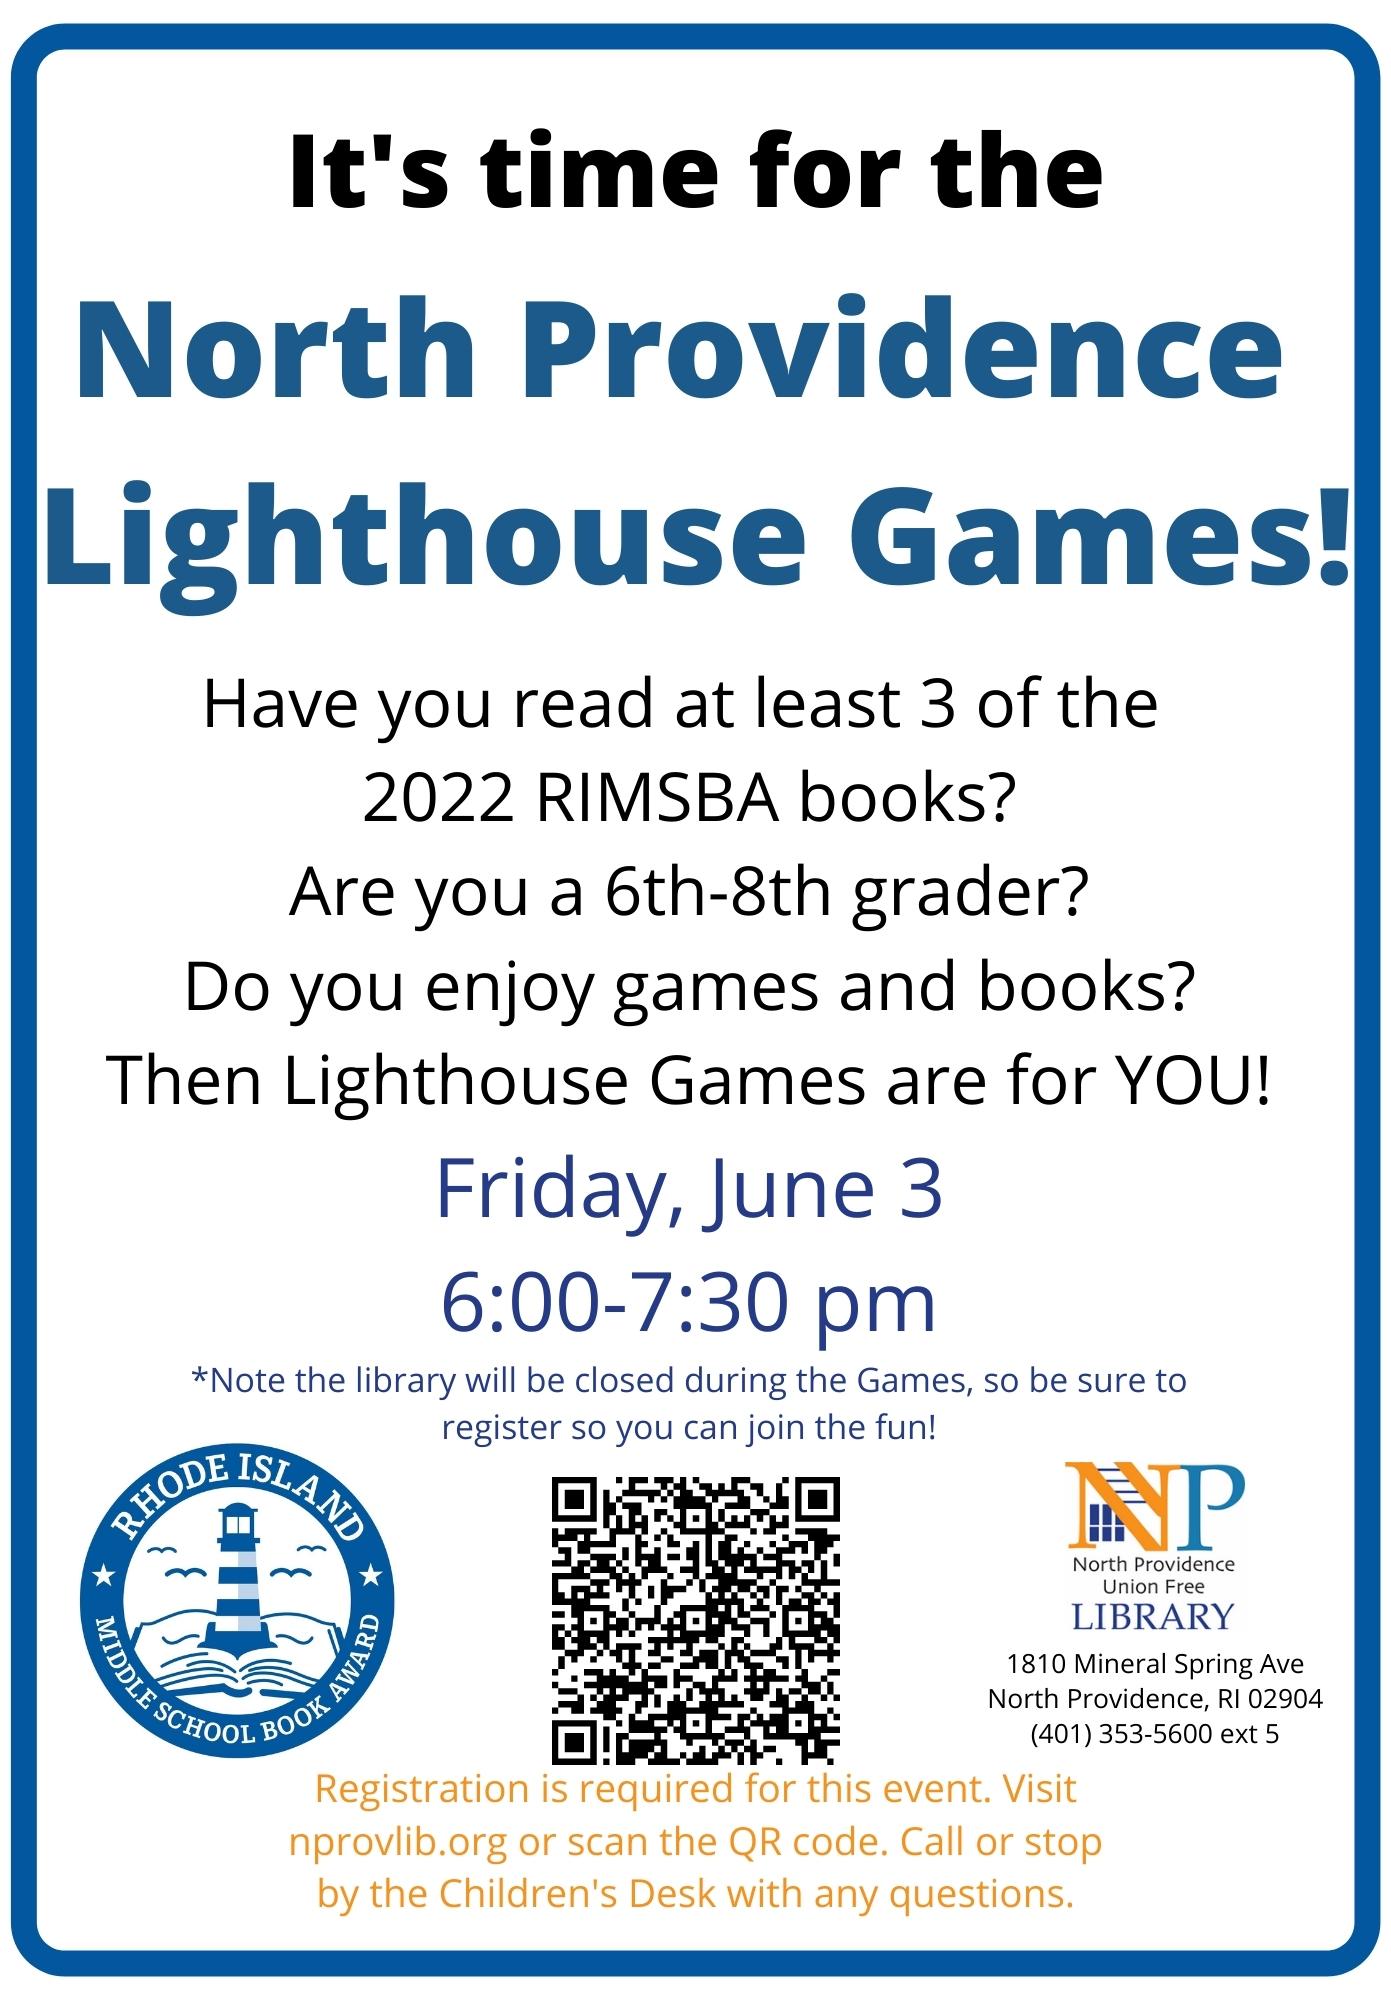 Flyer describing the Lighthouse Games for middle schoolers, Friday June 3, from 6-7:30pm.